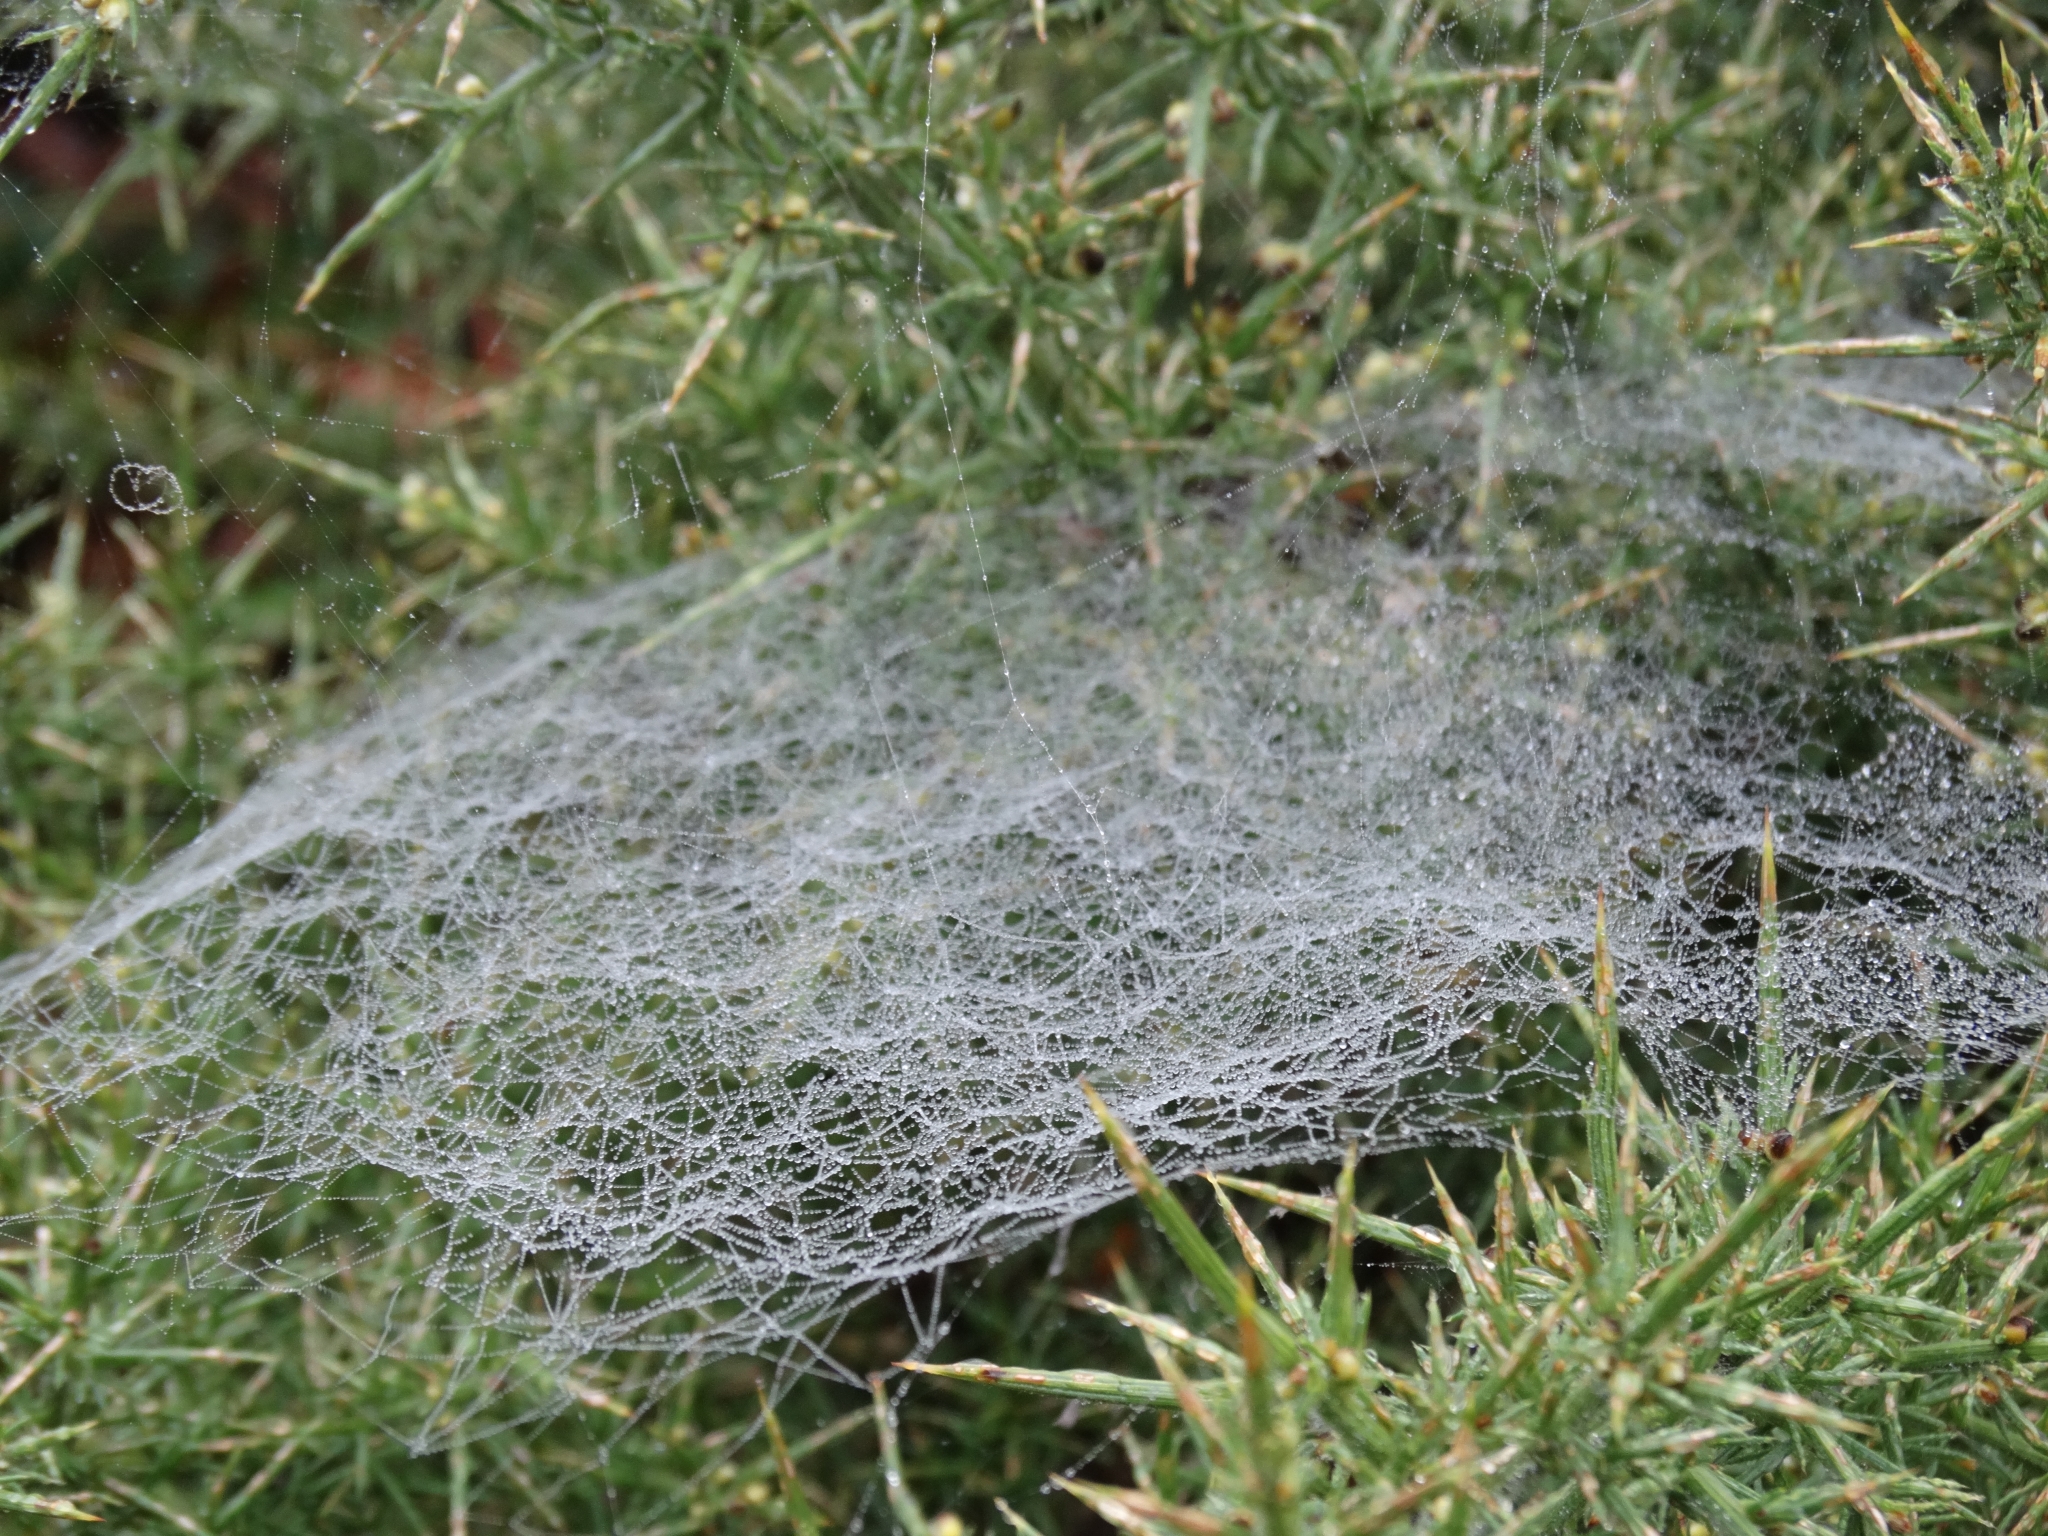 A photo from the FoTF Conservation Event - October 2019 - Gorse Clearance at Hockham Hills & Holes : Numerous spiders web in a Gorse bush